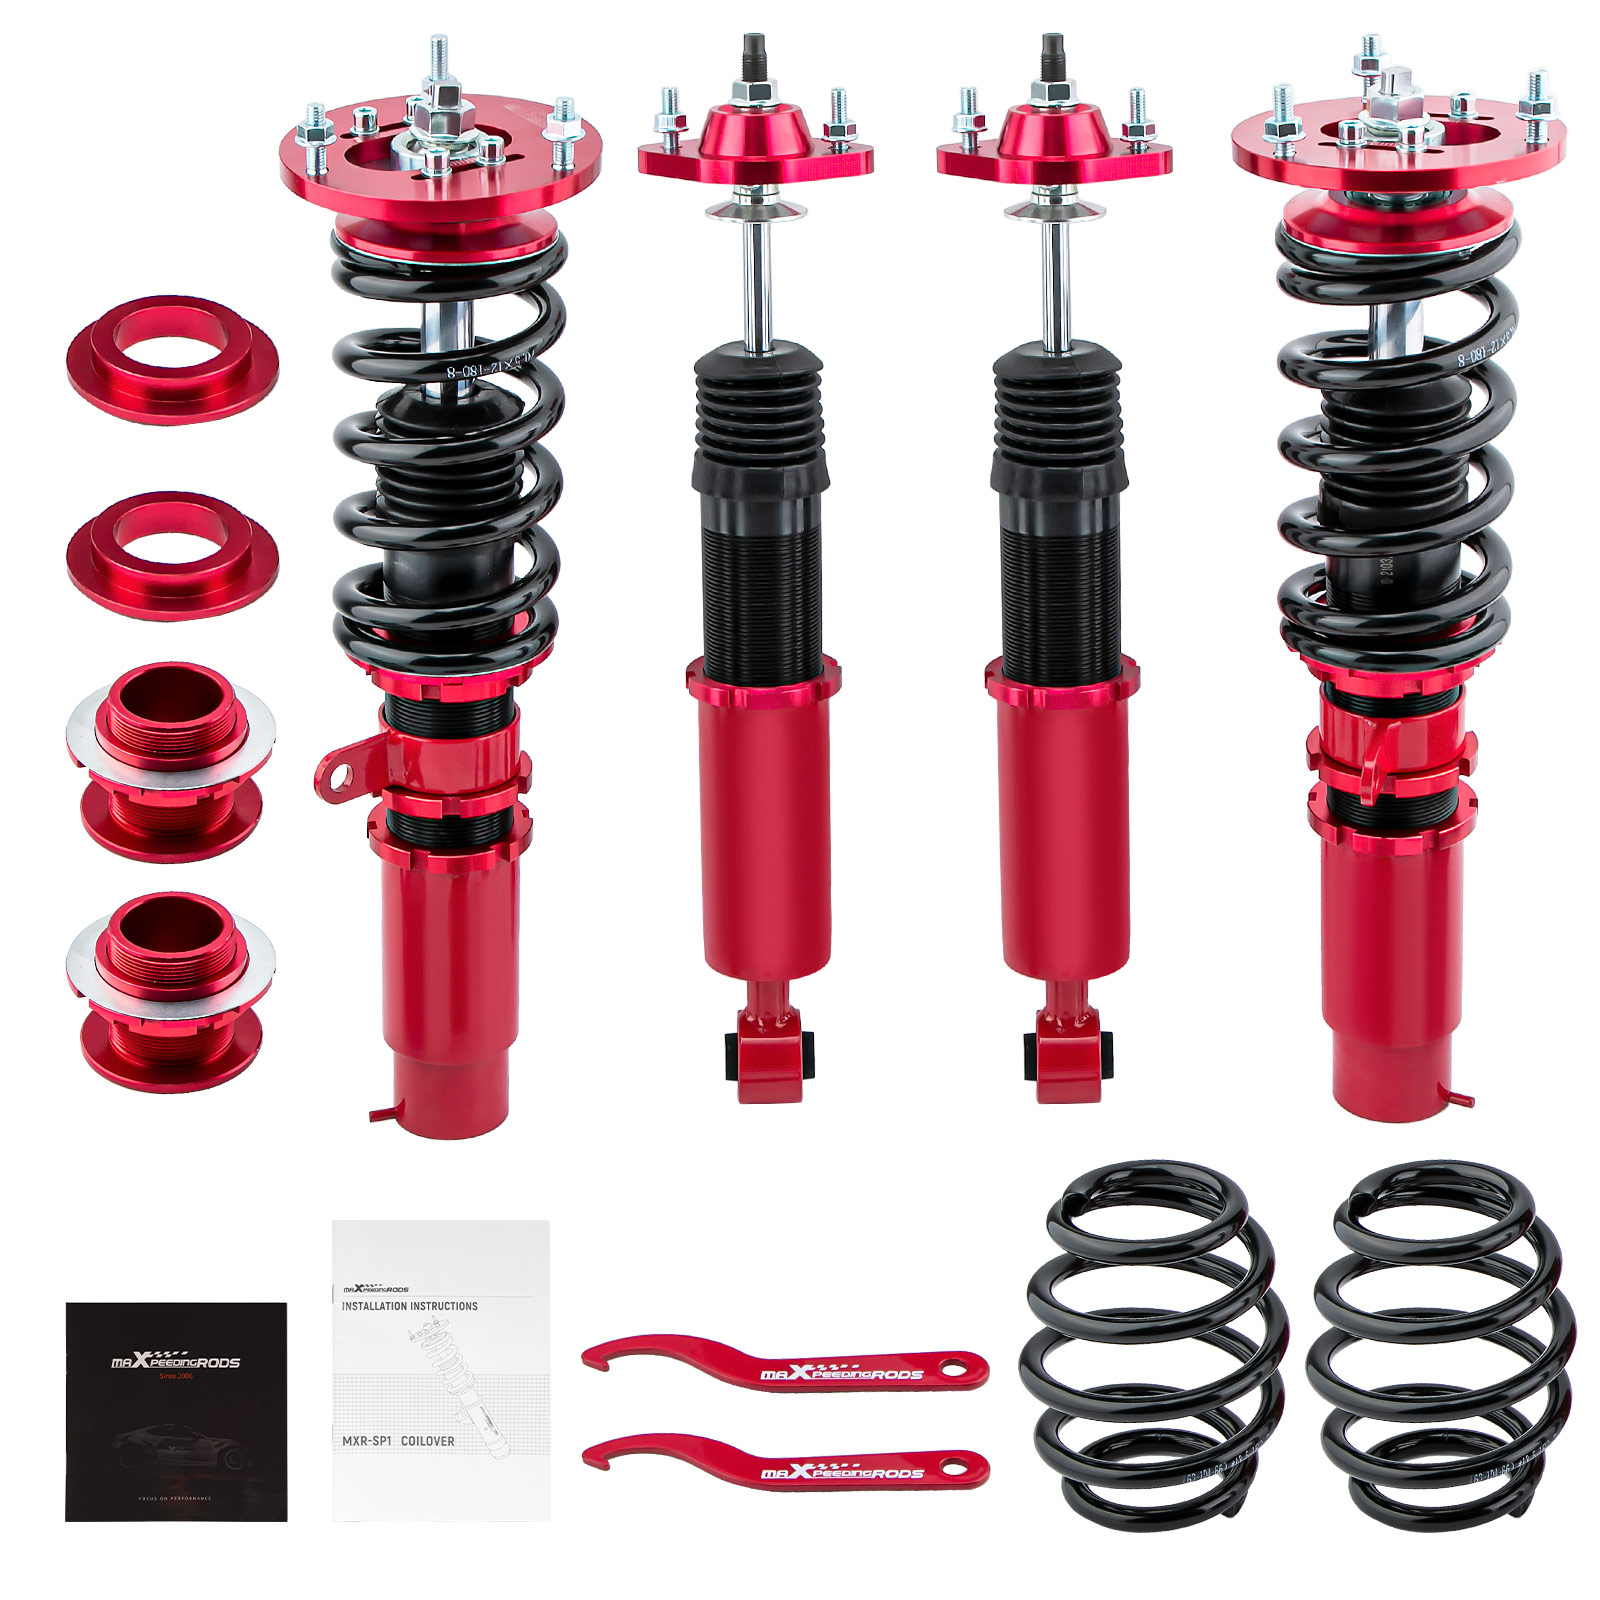 Coilovers Suspension Kit for BMW 3 Series E46 Saloon/Coupe 2WD 98-05 318d 330ci